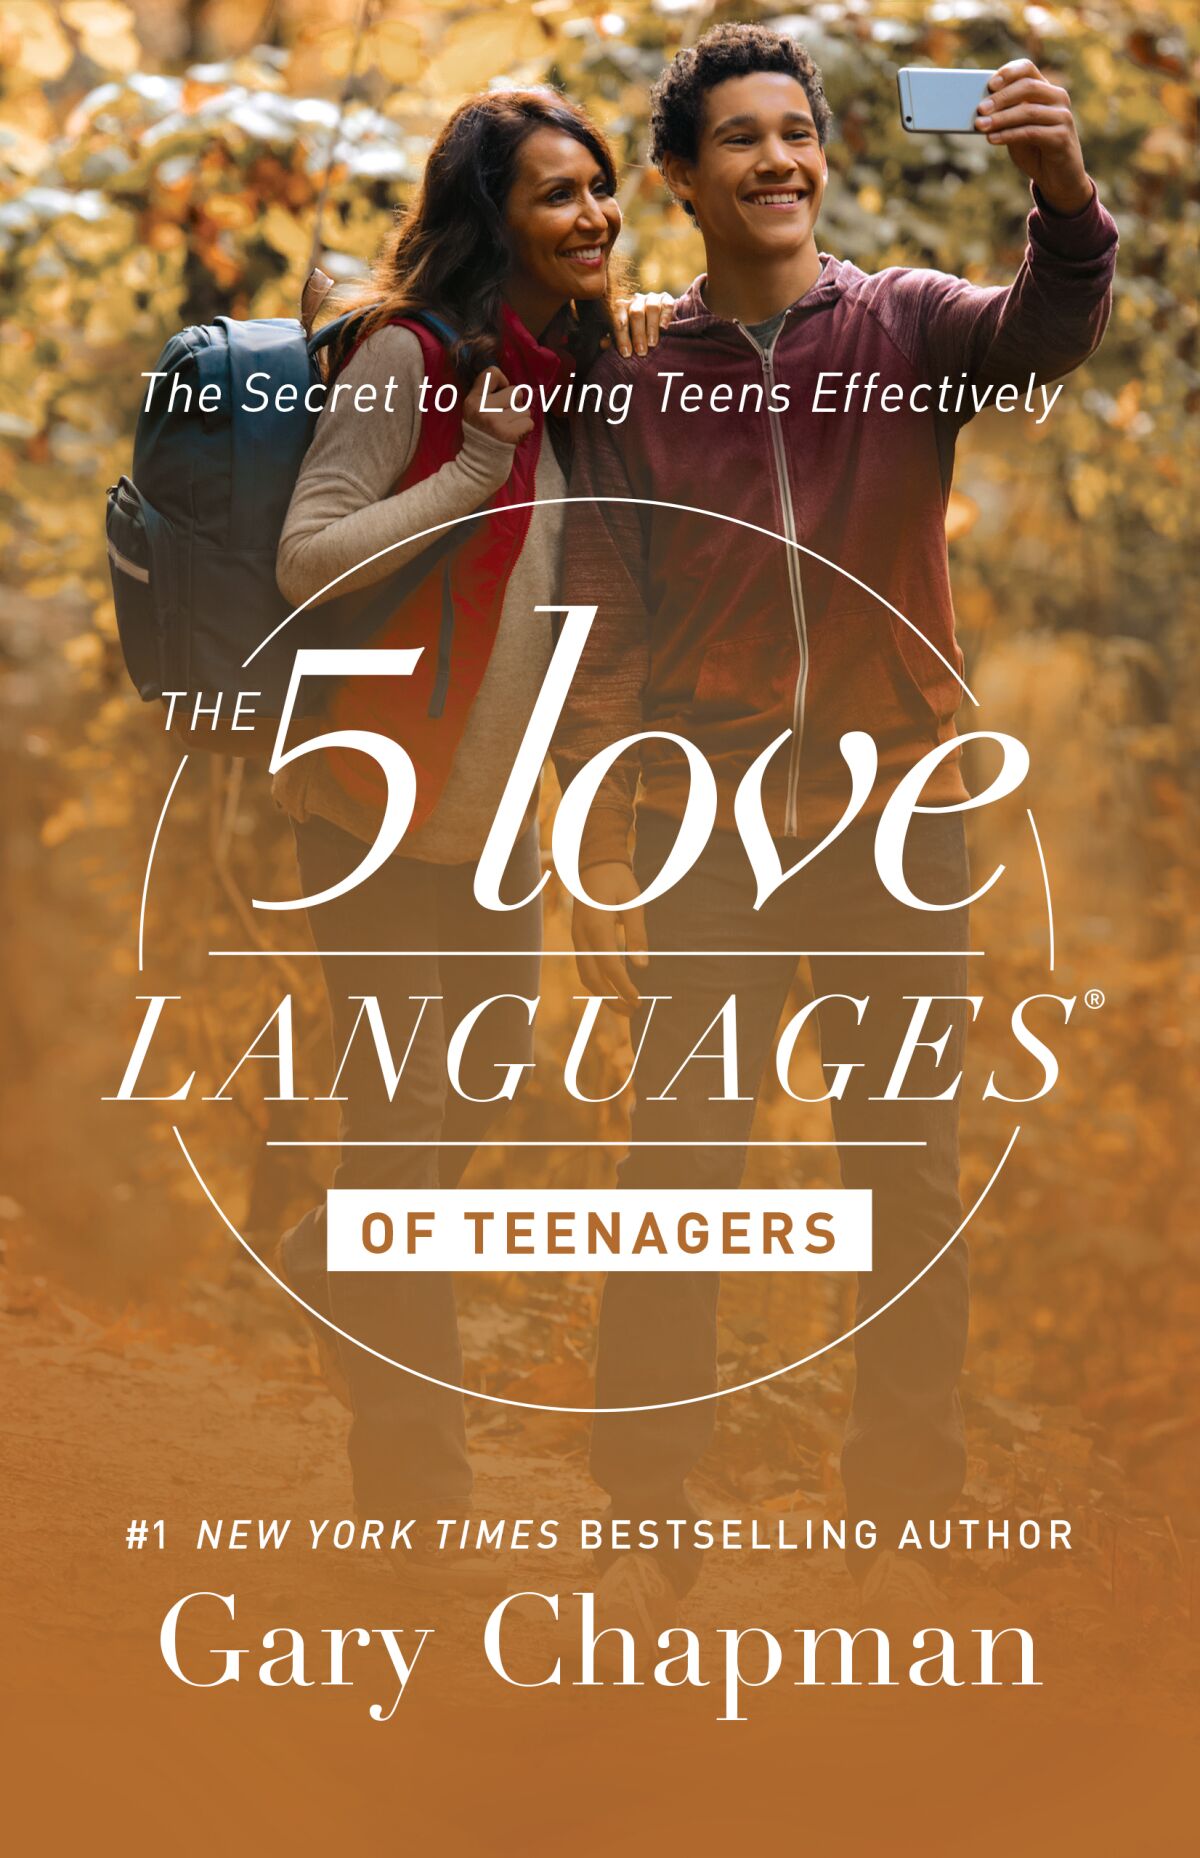 The cover of “The 5 Love Languages of Teenagers: The Secret to Loving Teens Effectively.”